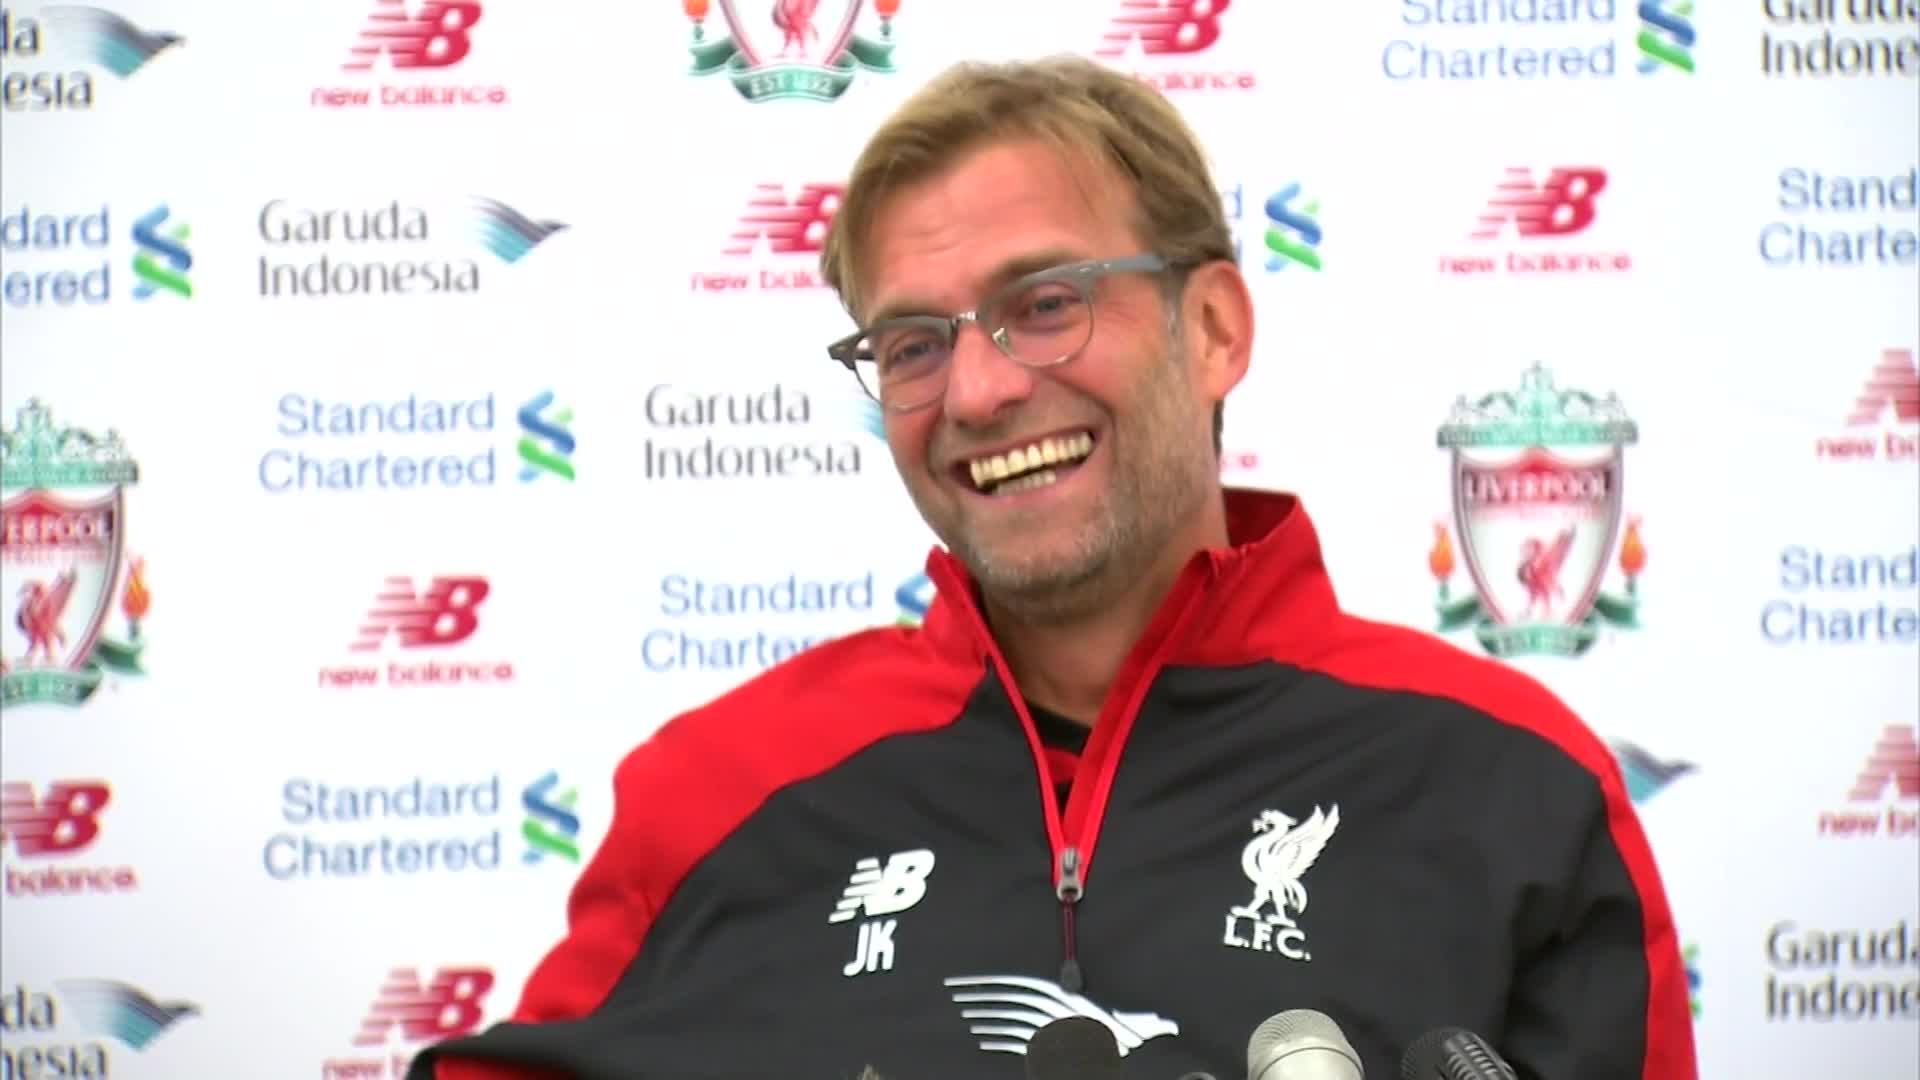 Jurgen Klopp's news conference ahead of Spurs game in full